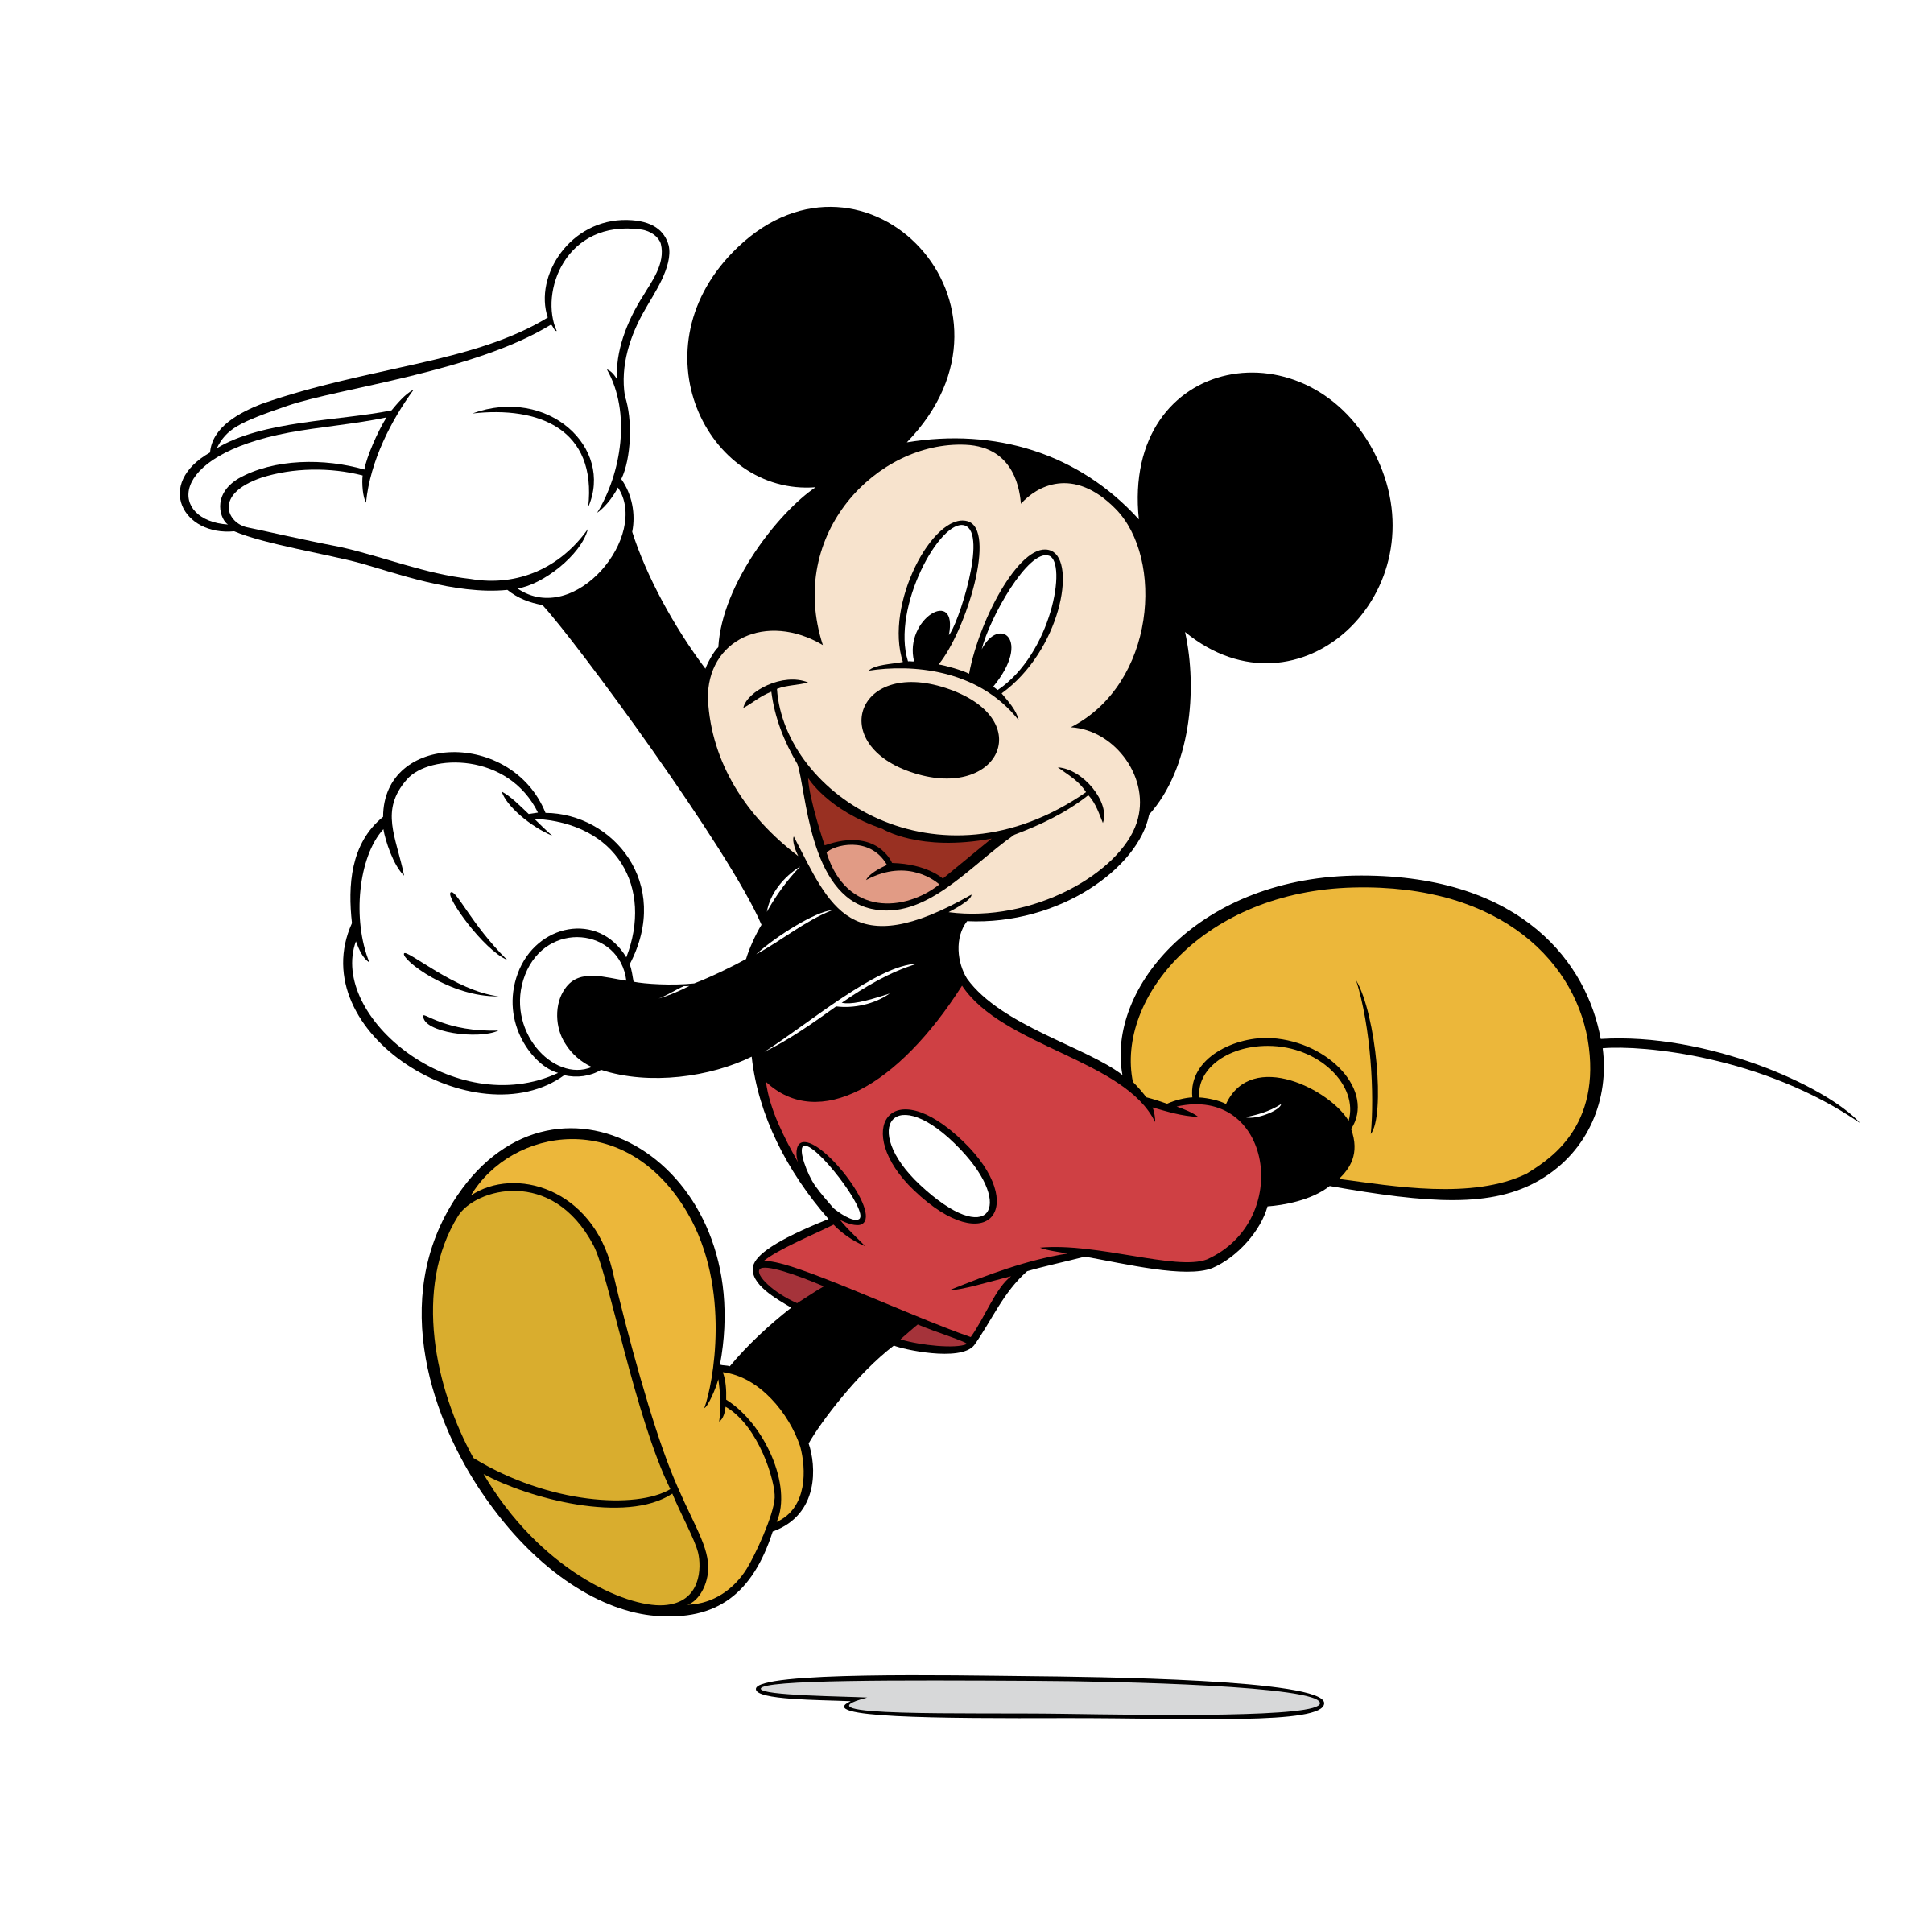 Mickey Mouse Gucci Png, Gucci Logo Png, Mickey Mouse Png, Di - Inspire  Uplift